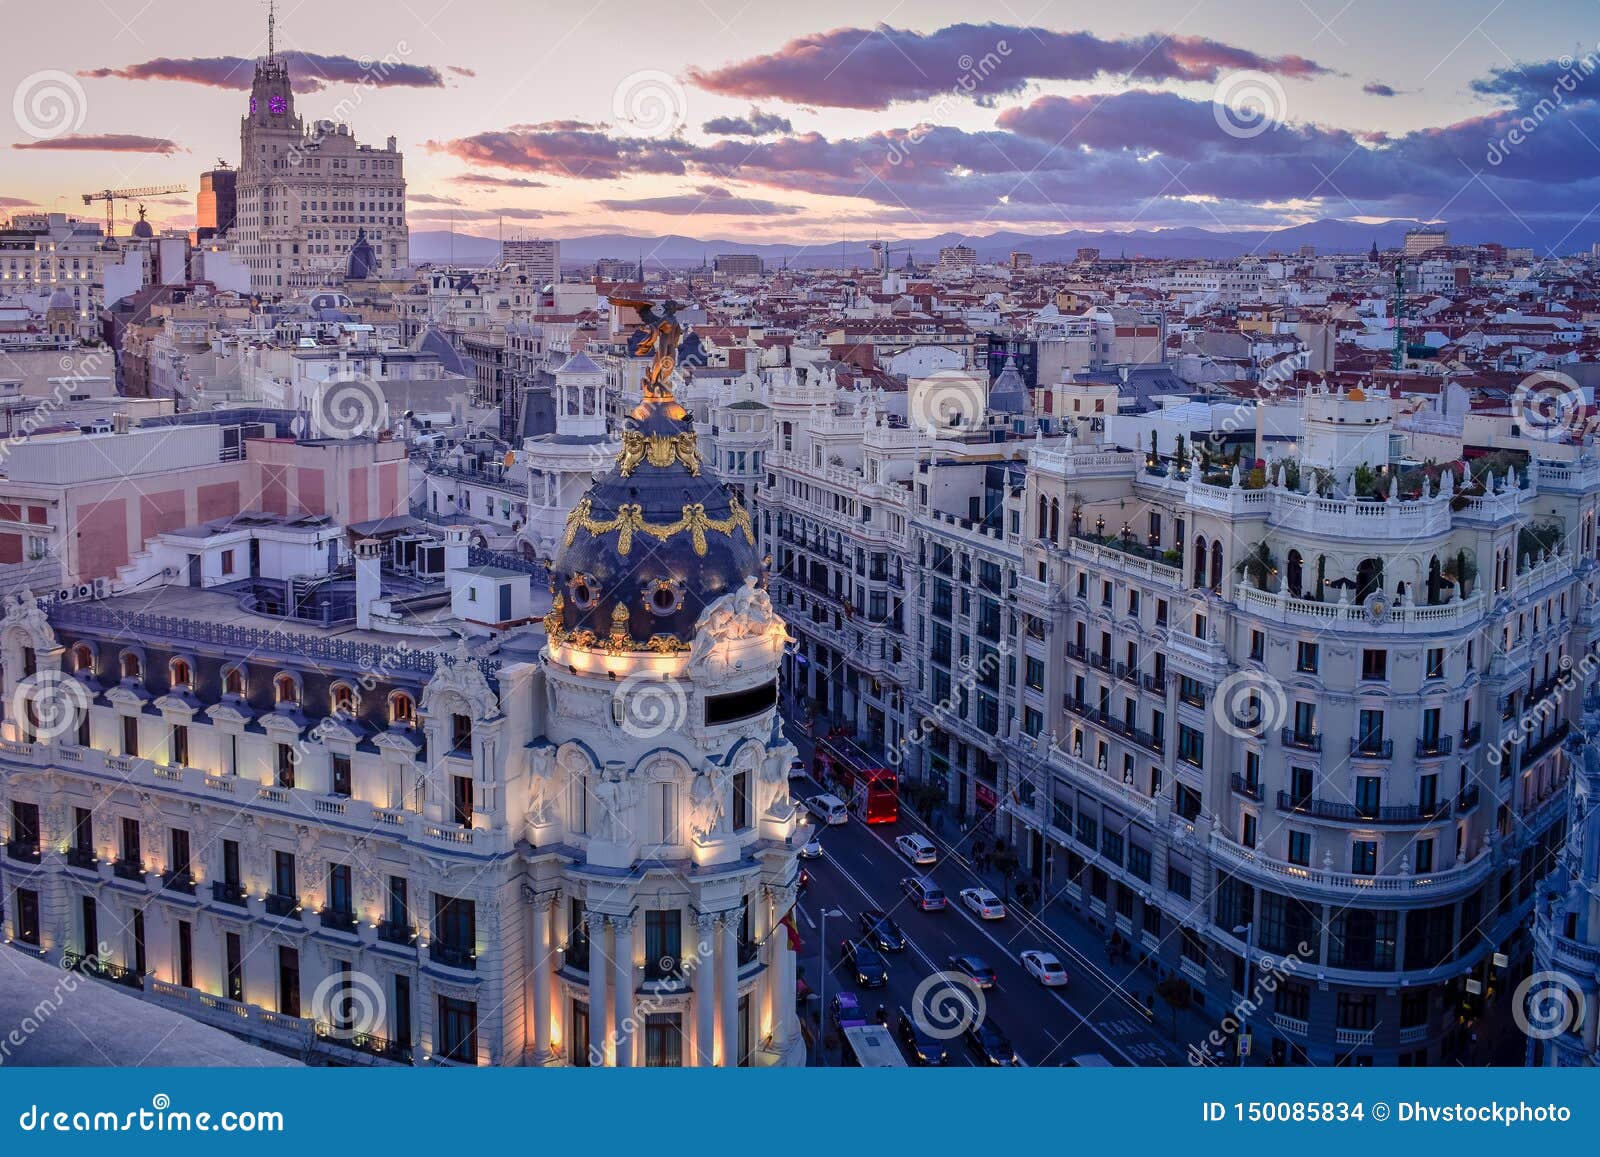 downtown areal view of madris from the circulo de bellas artes at sunset with colourful sky, spain